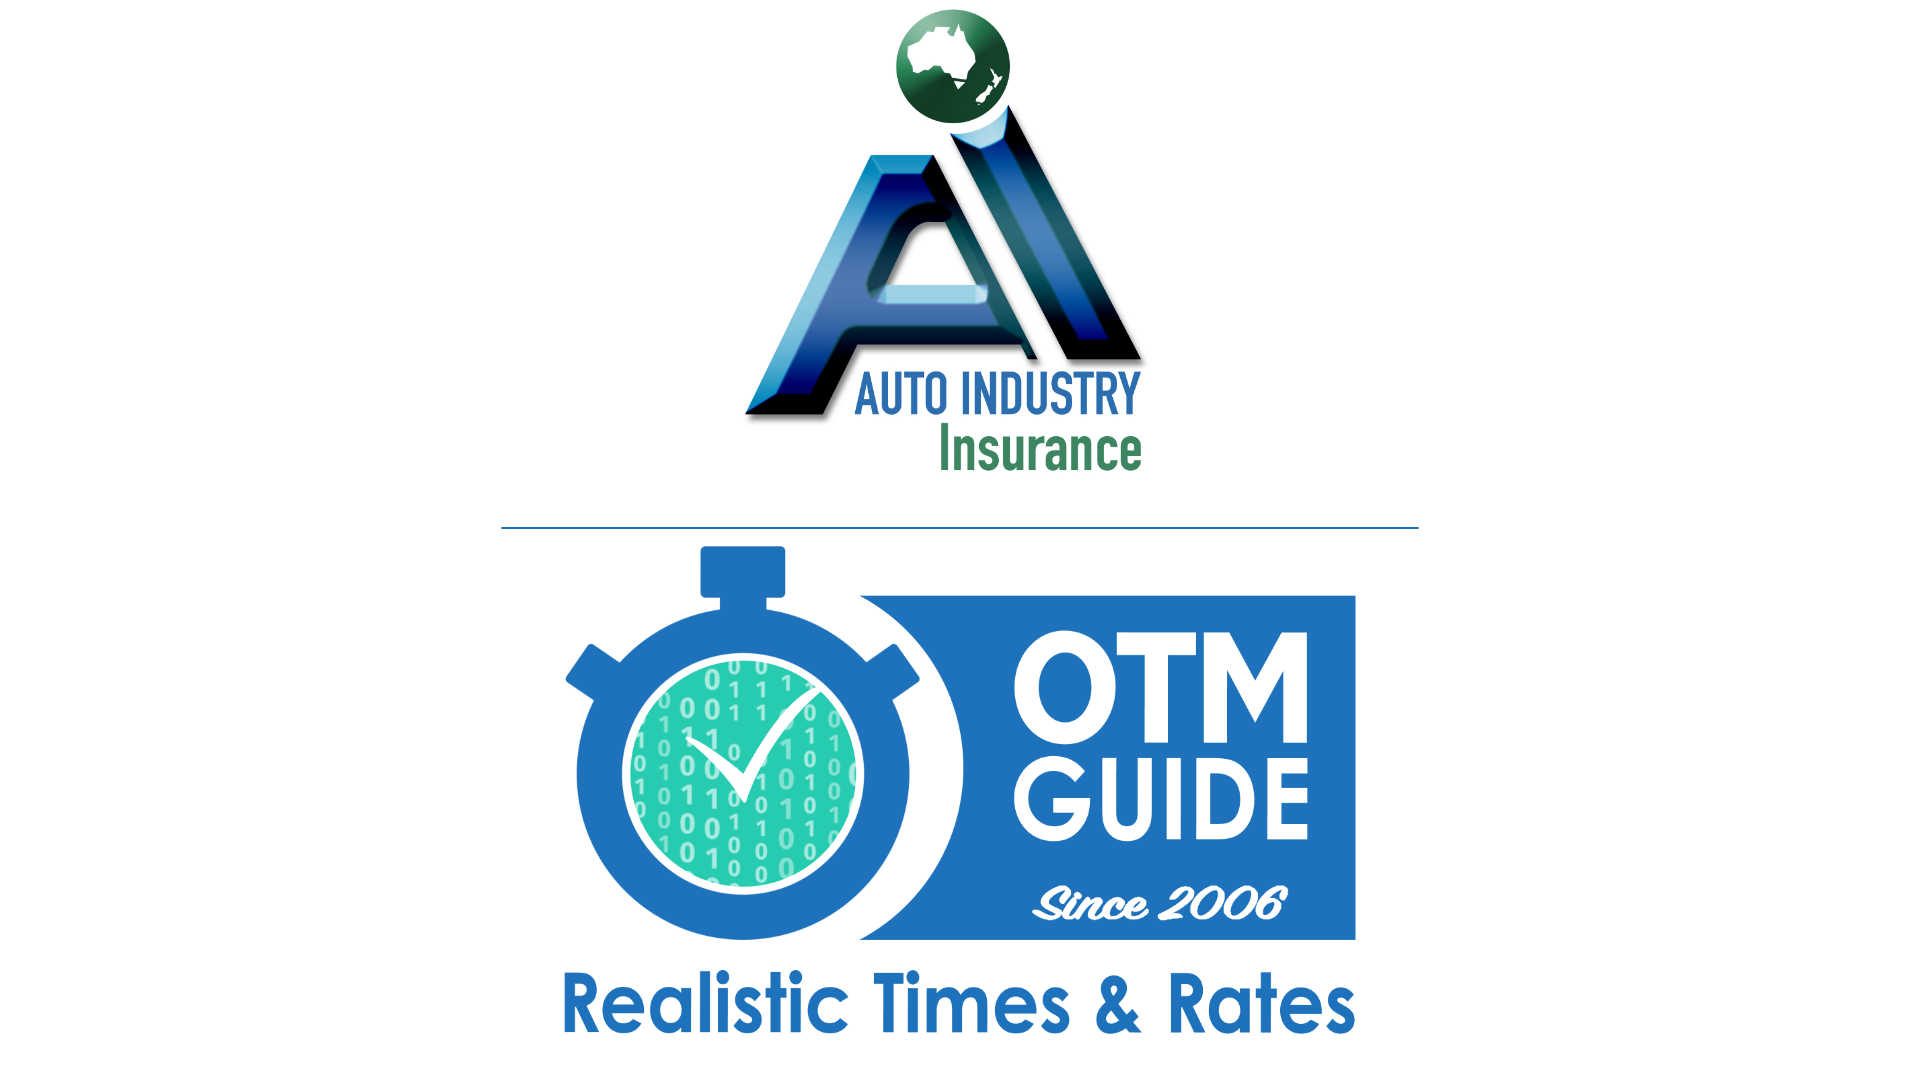 Auto Industry Insurance to Use OTM Times Guide